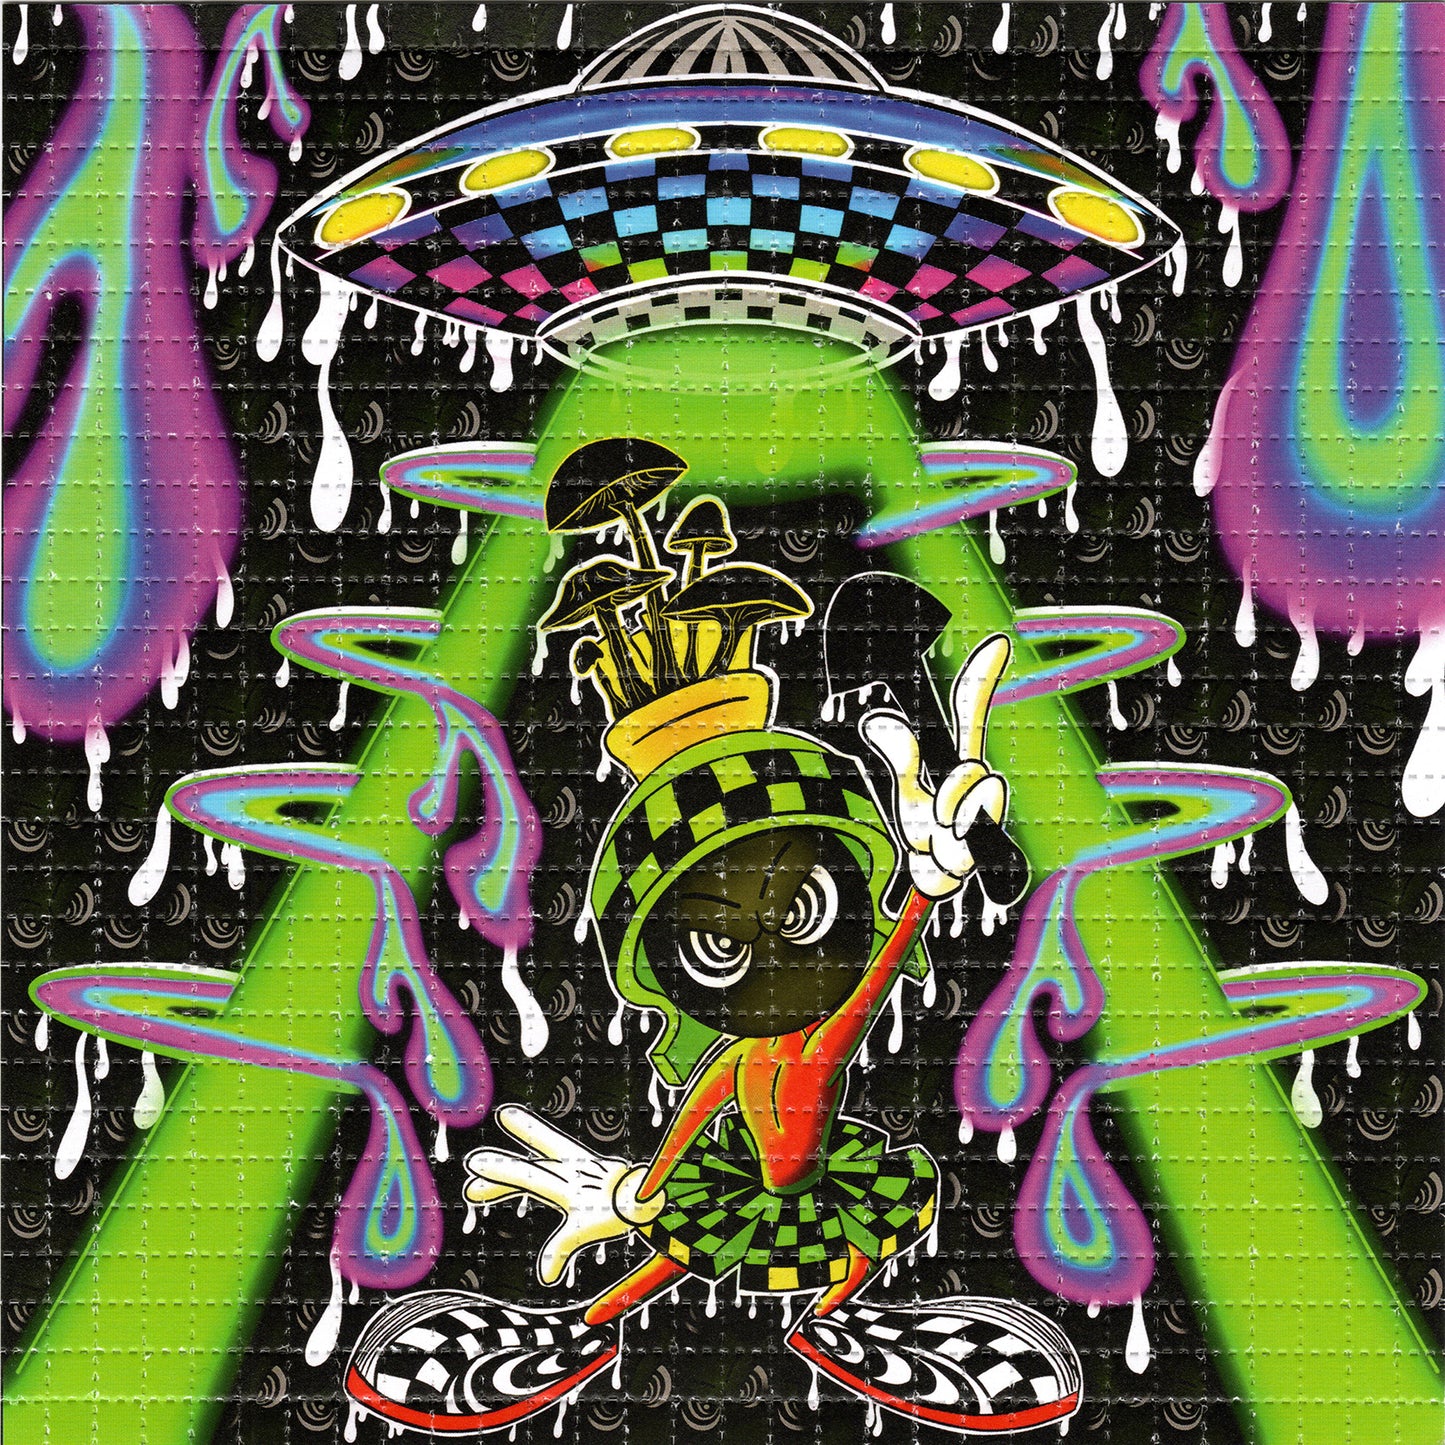 Marvin by Tripsy Lou SIGNED Limited Edition LSD blotter art print